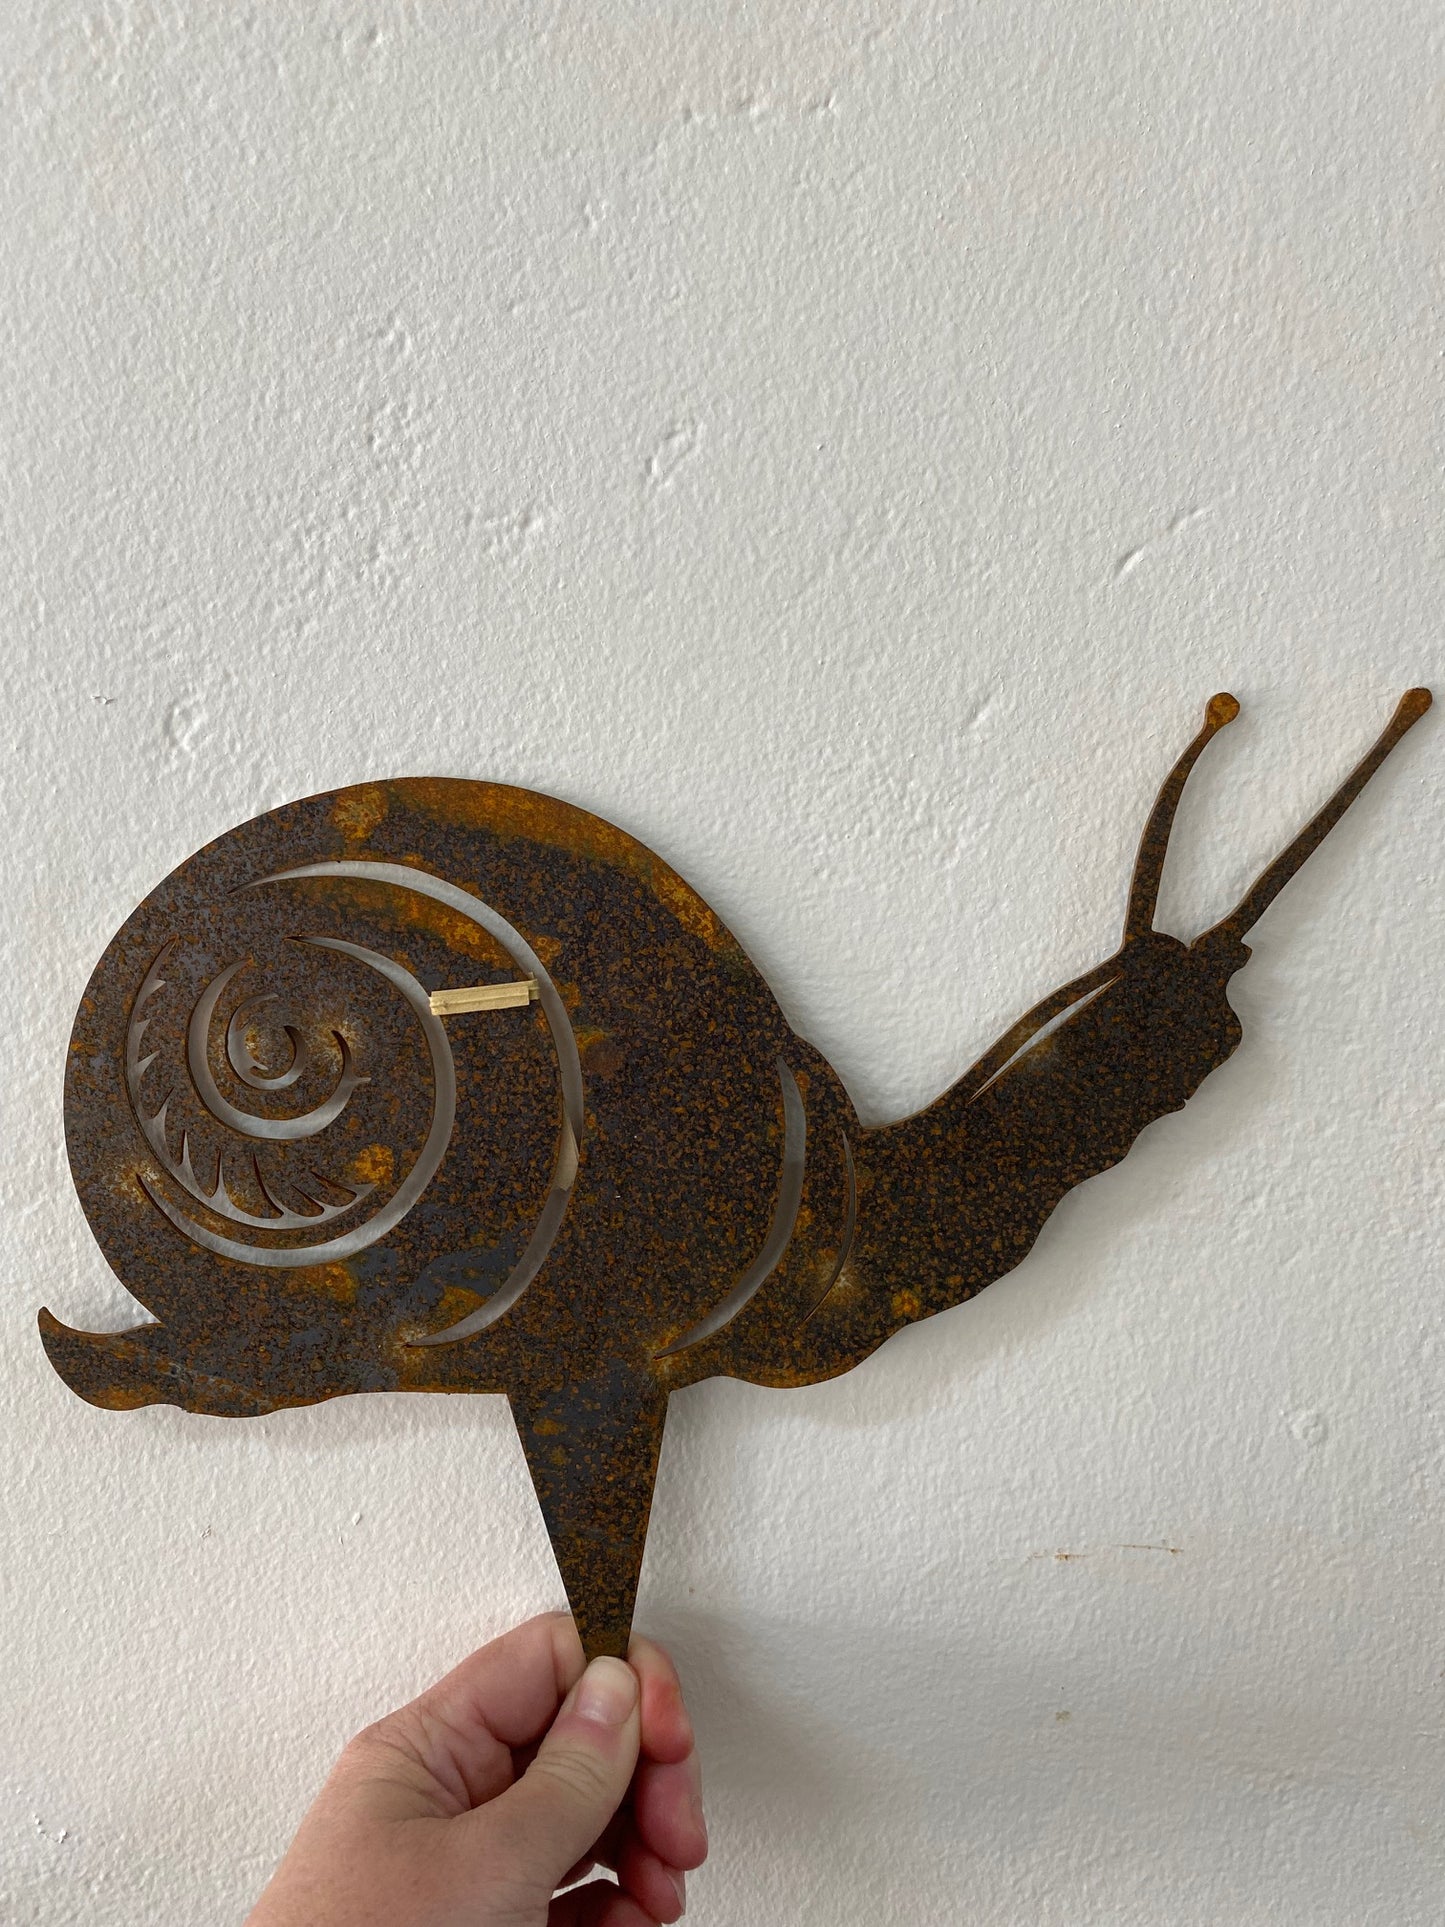 Large snail by Design 2 fab